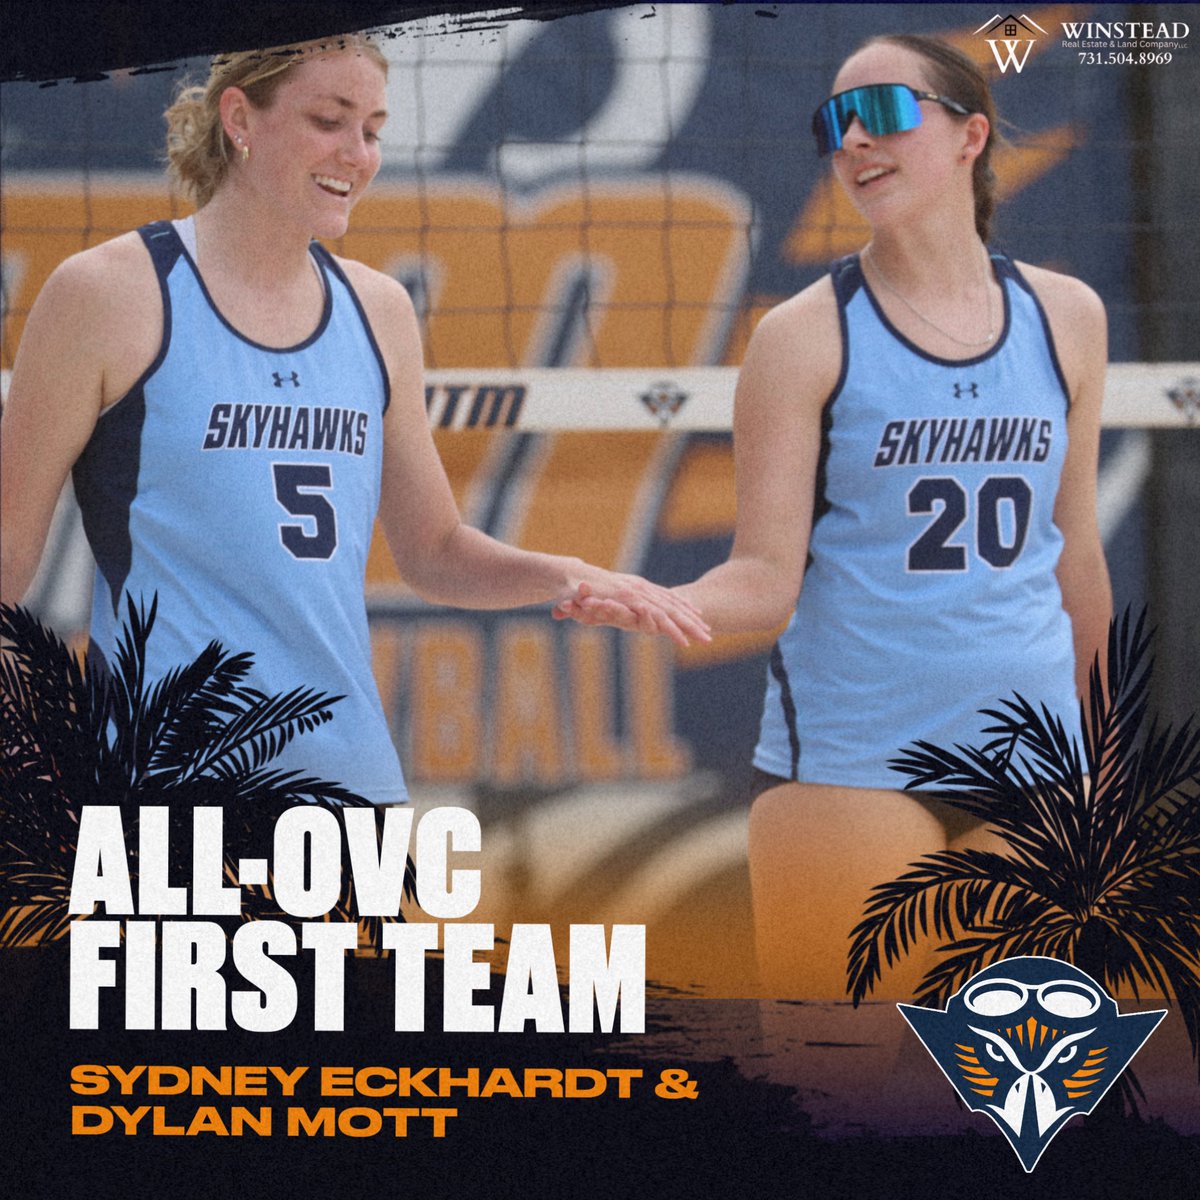 Congratulations to Skyhawk No. 2 pair Sydney Eckhardt and Dylan Mott, who were named to the All-Ohio Valley Conference first team this evening!

🏐 18-7 overall record
🏐 8-0 OVC record

#MartinMade | #OVCit